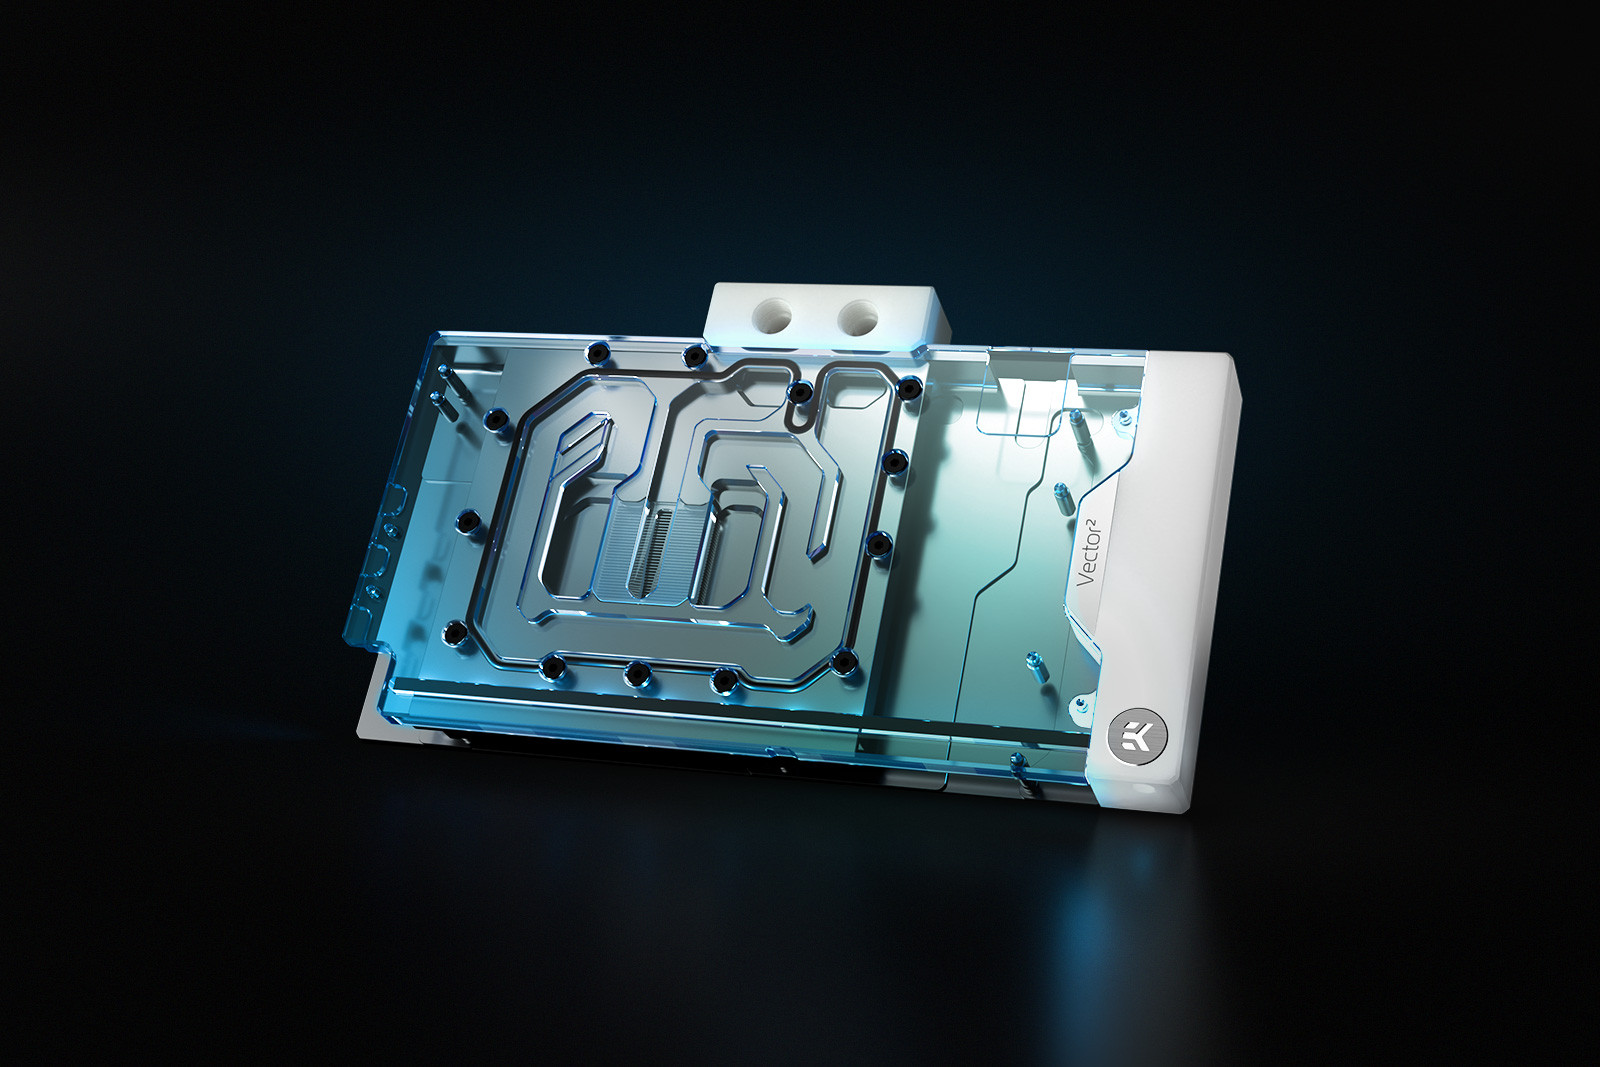 A large marketing image providing additional information about the product EK Quantum Vector2 Strix/TUF RTX 4090 D-RGB GPU Waterblock - White - Additional alt info not provided